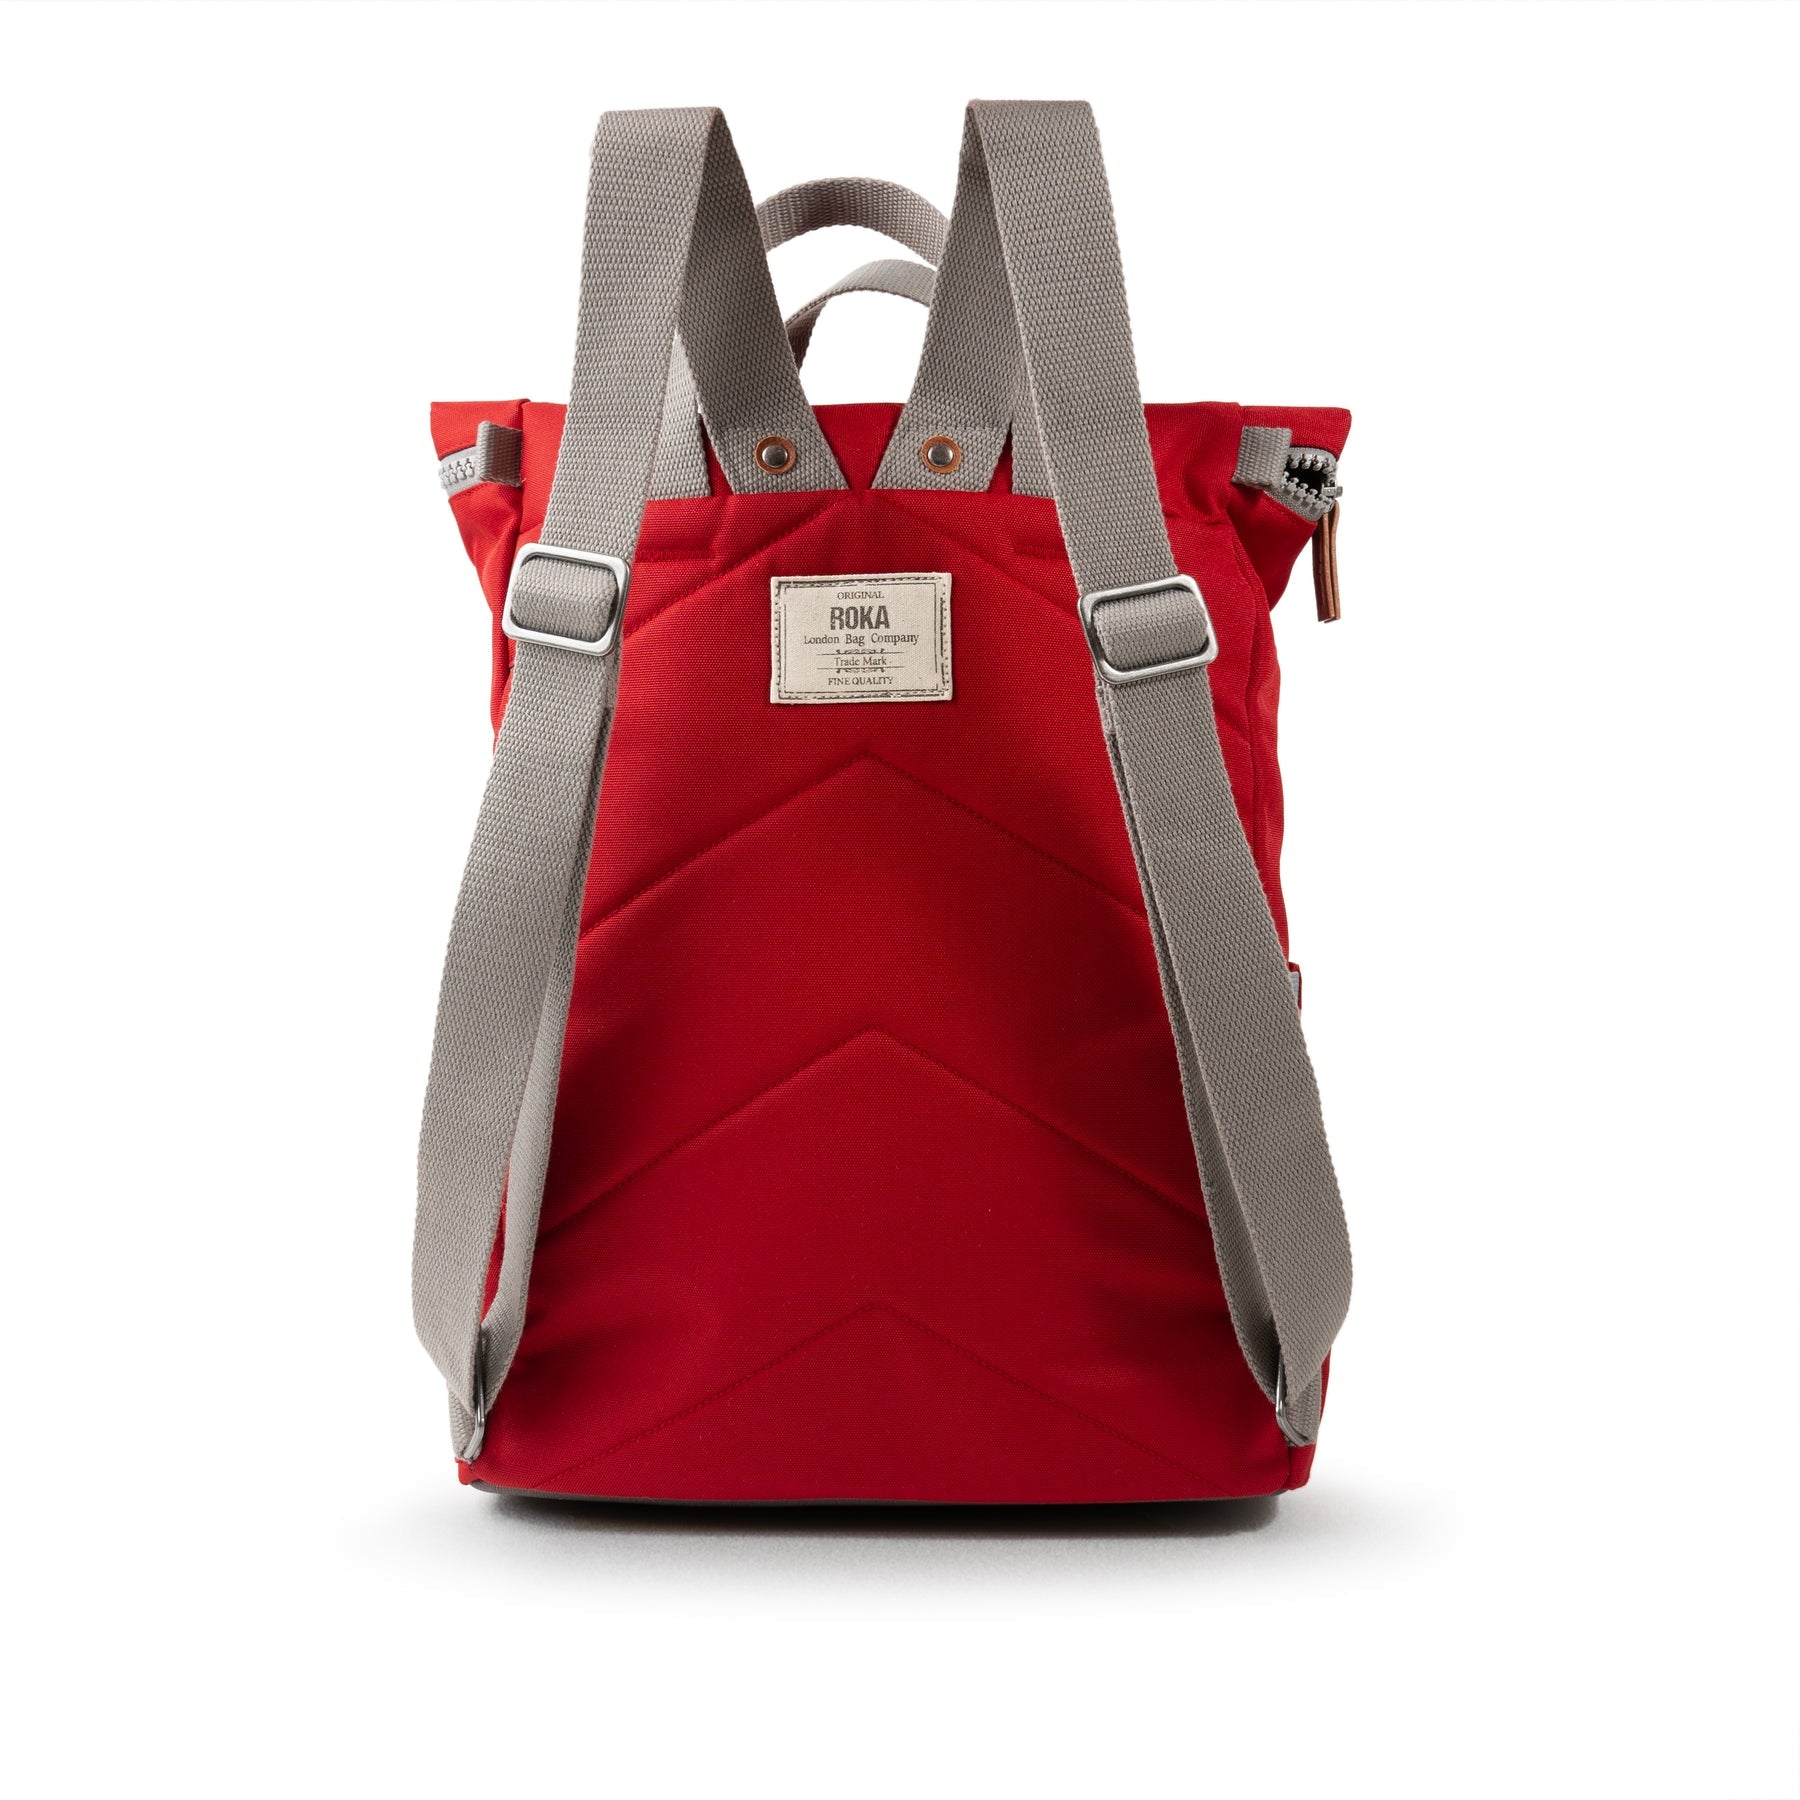 ROKA Finchley A Mars Red Large Recycled Canvas Bag - OS